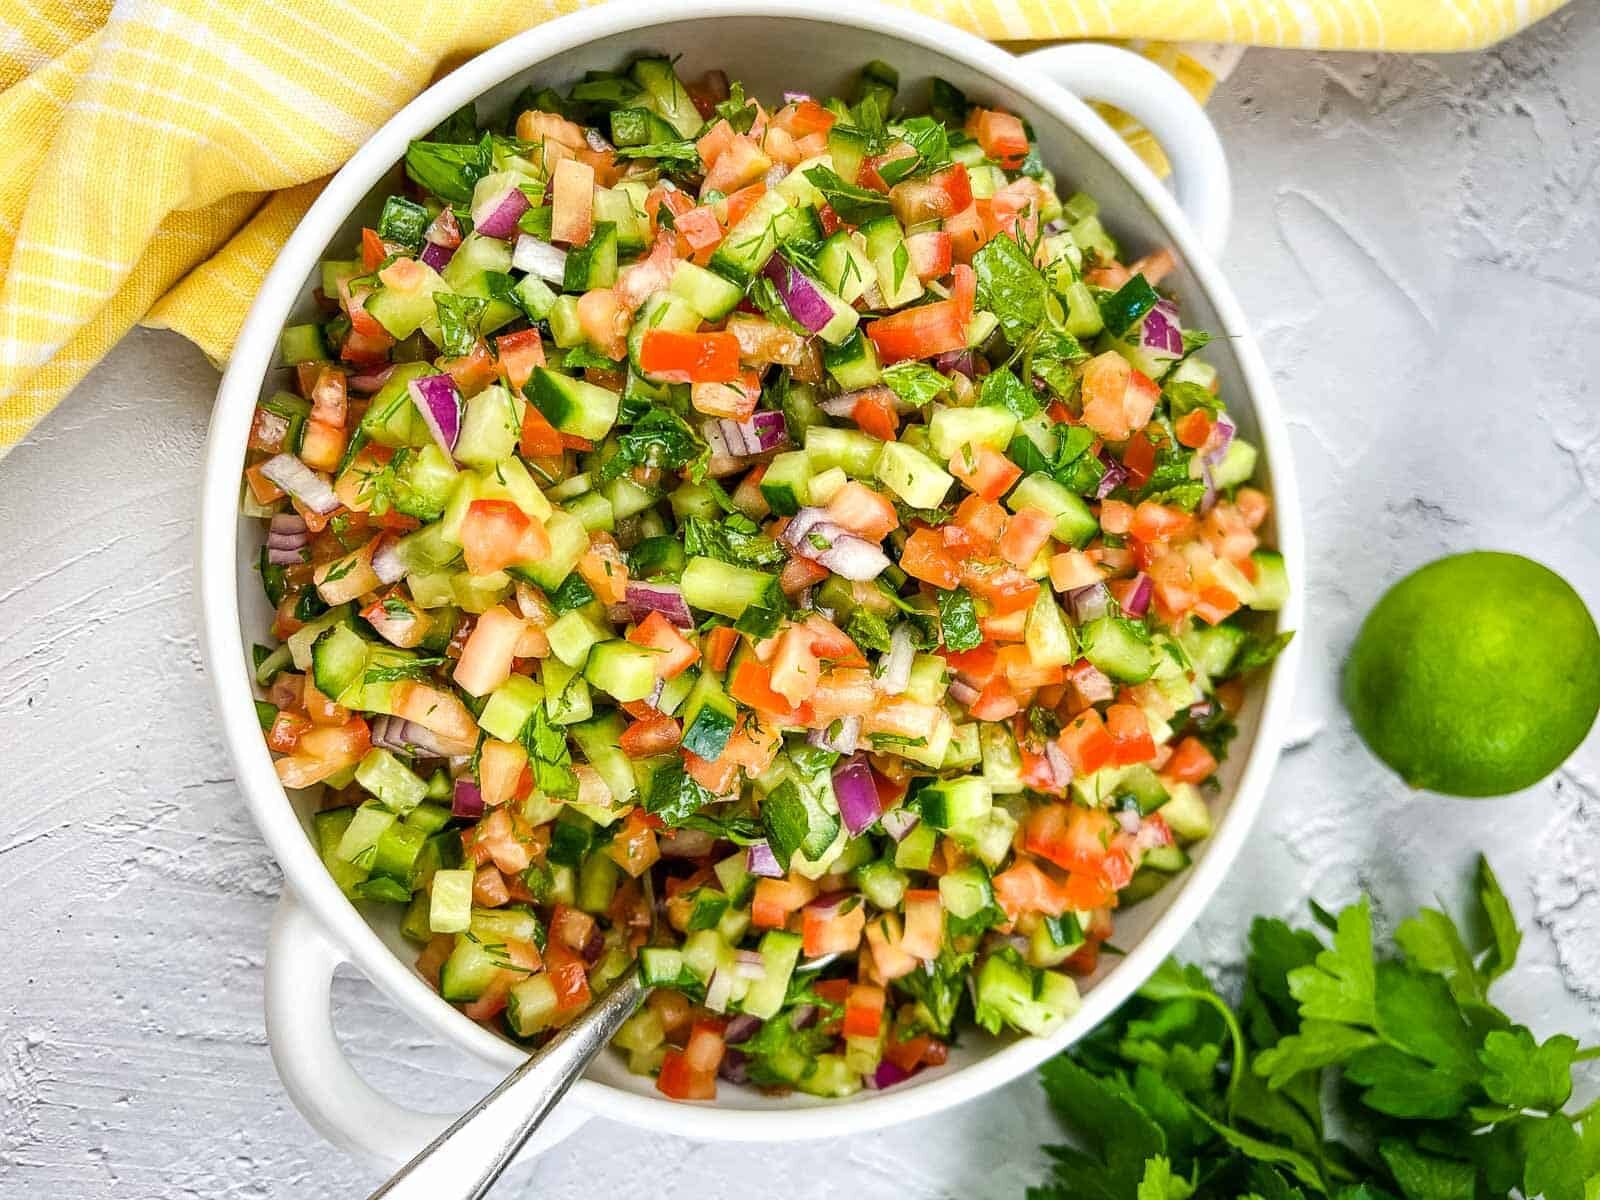 <p>Ideal for a quick side dish or a light lunch, this salad is versatile. Shirazi Salad is your go-to when you want something light and refreshing. It’s a simple mix of ingredients that come together to offer a punch of flavor. Plus, it’s so quick to whip up!<br><strong>Get the Recipe: </strong><a href="https://cookwhatyoulove.com/shirazi-salad-recipe/?utm_source=msn&utm_medium=page&utm_campaign=17%20low-carb%20dinners%20that%20don't%20skimp%20on%20flavor">Shirazi Salad</a></p>